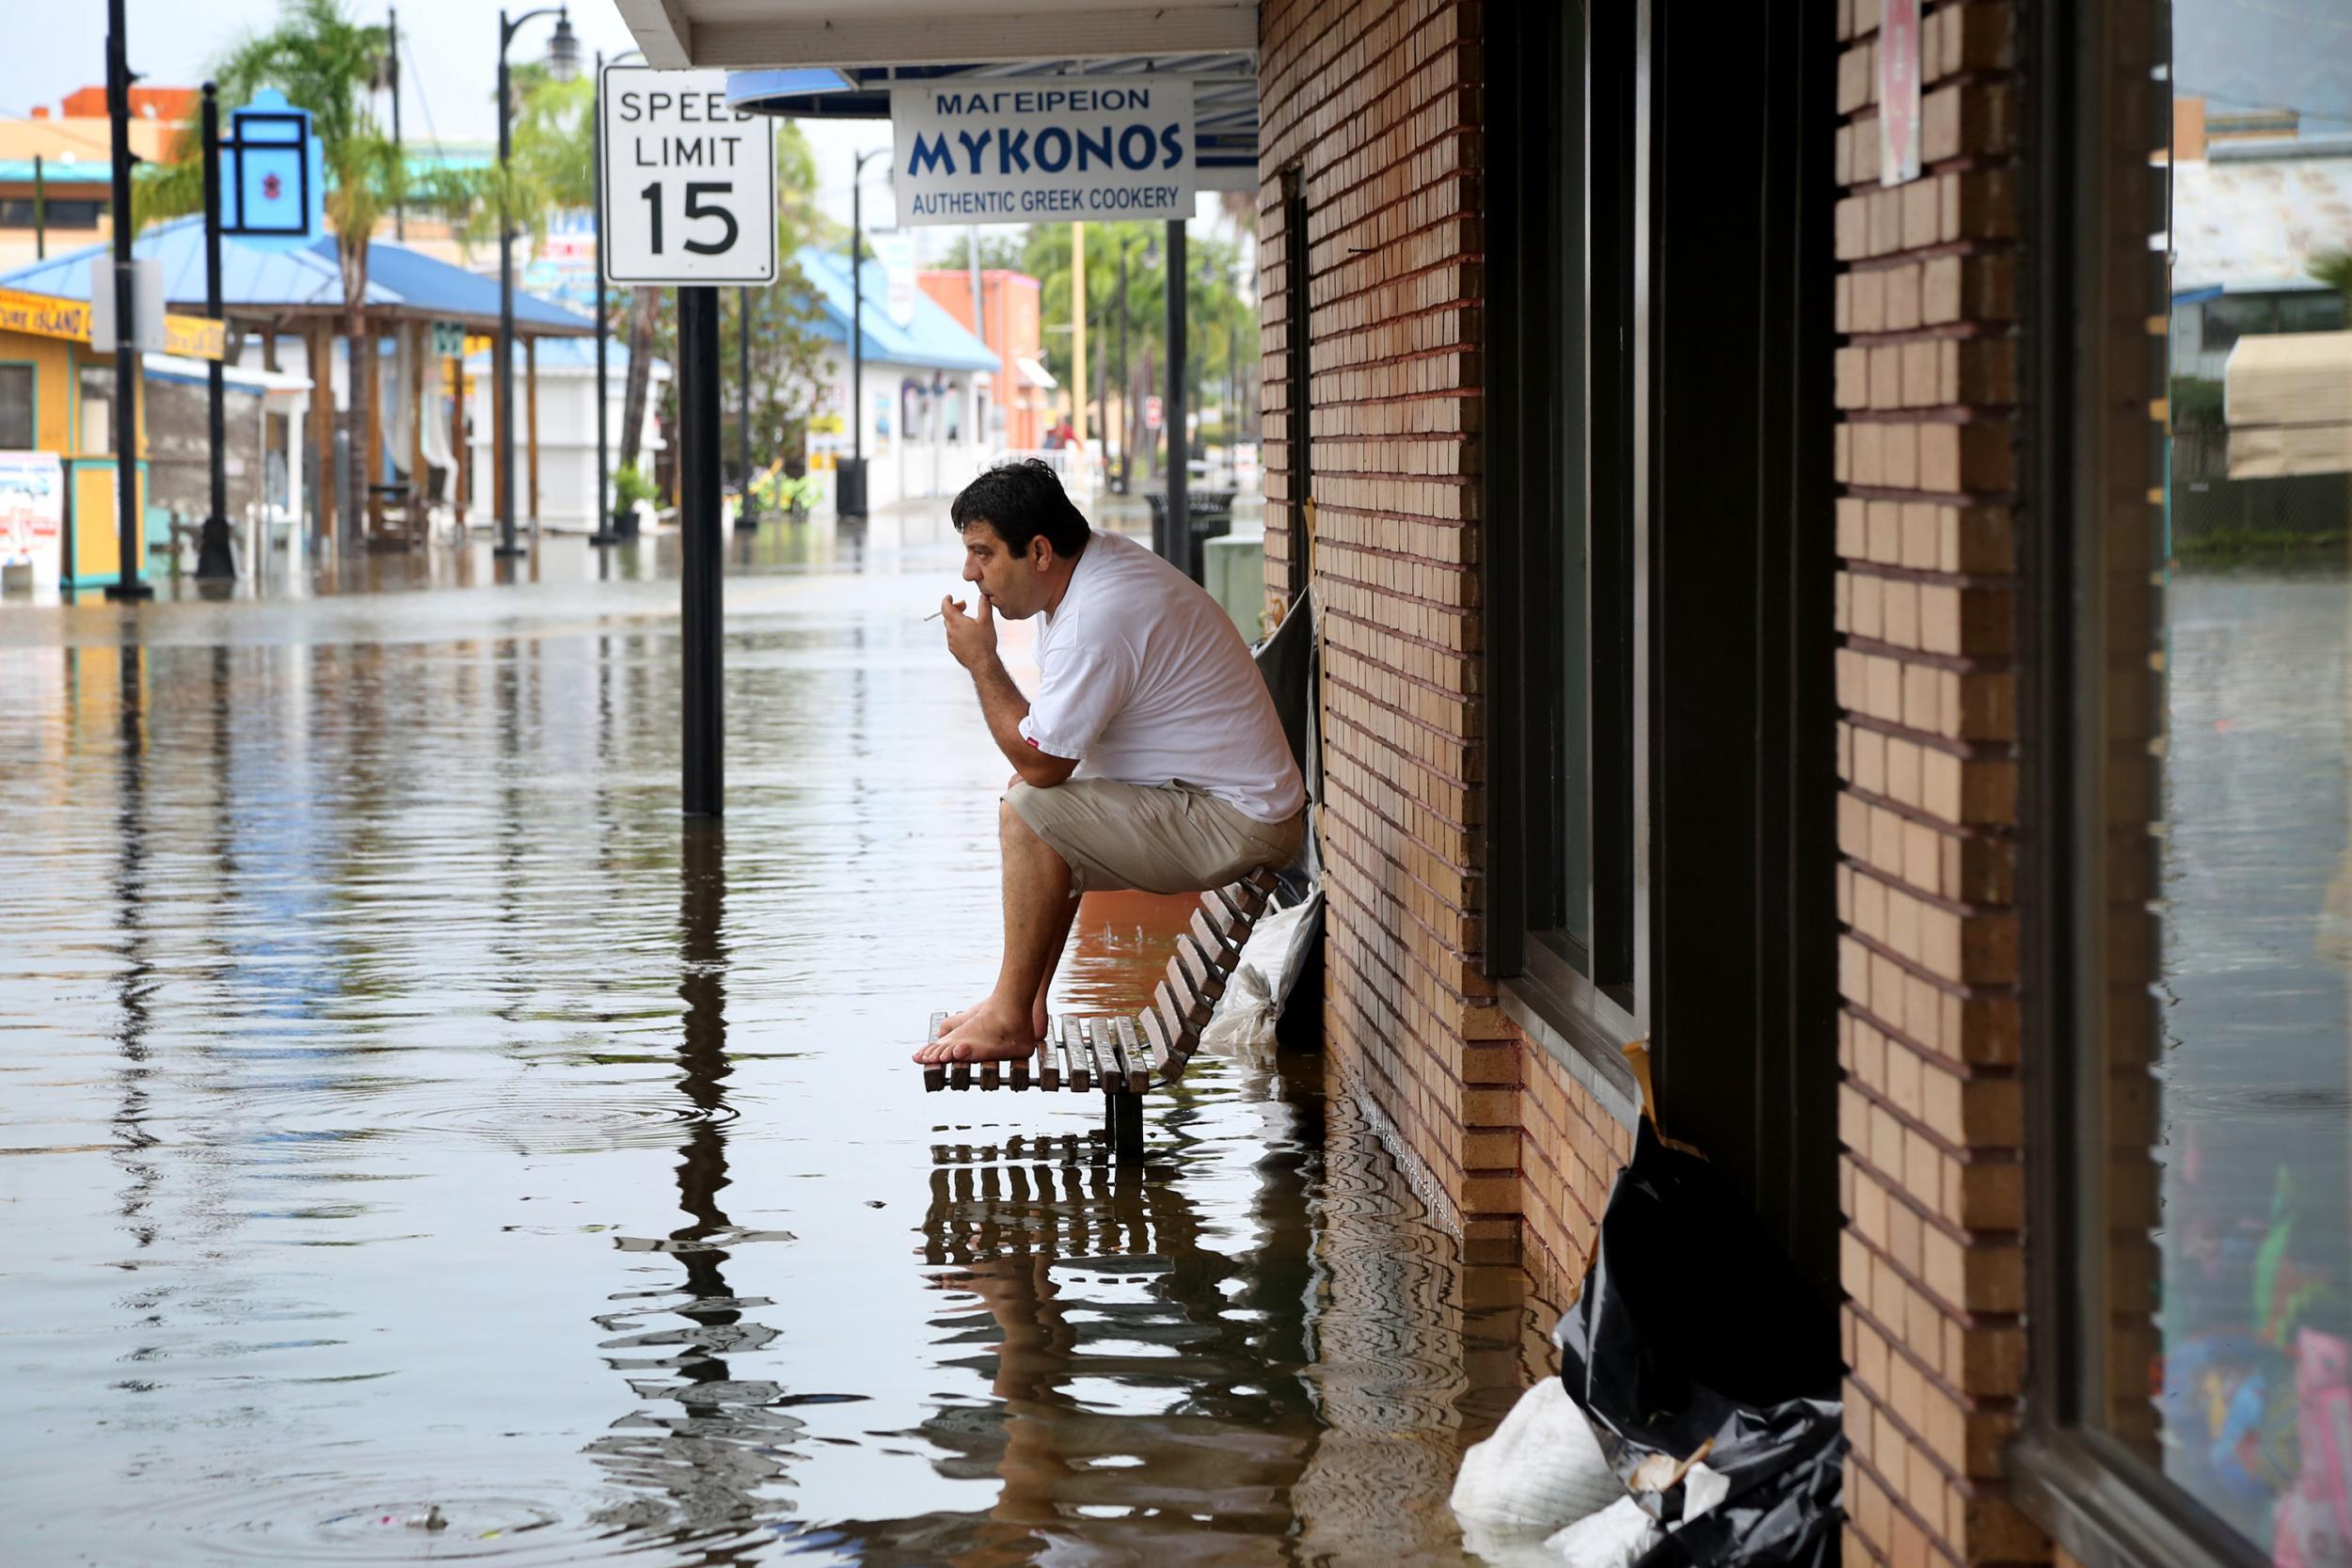 Pedro Muacaj rests on higher ground in front of a gift shop along a flooded section of Dodecanese Boulevard in Tarpon Springs, Florida